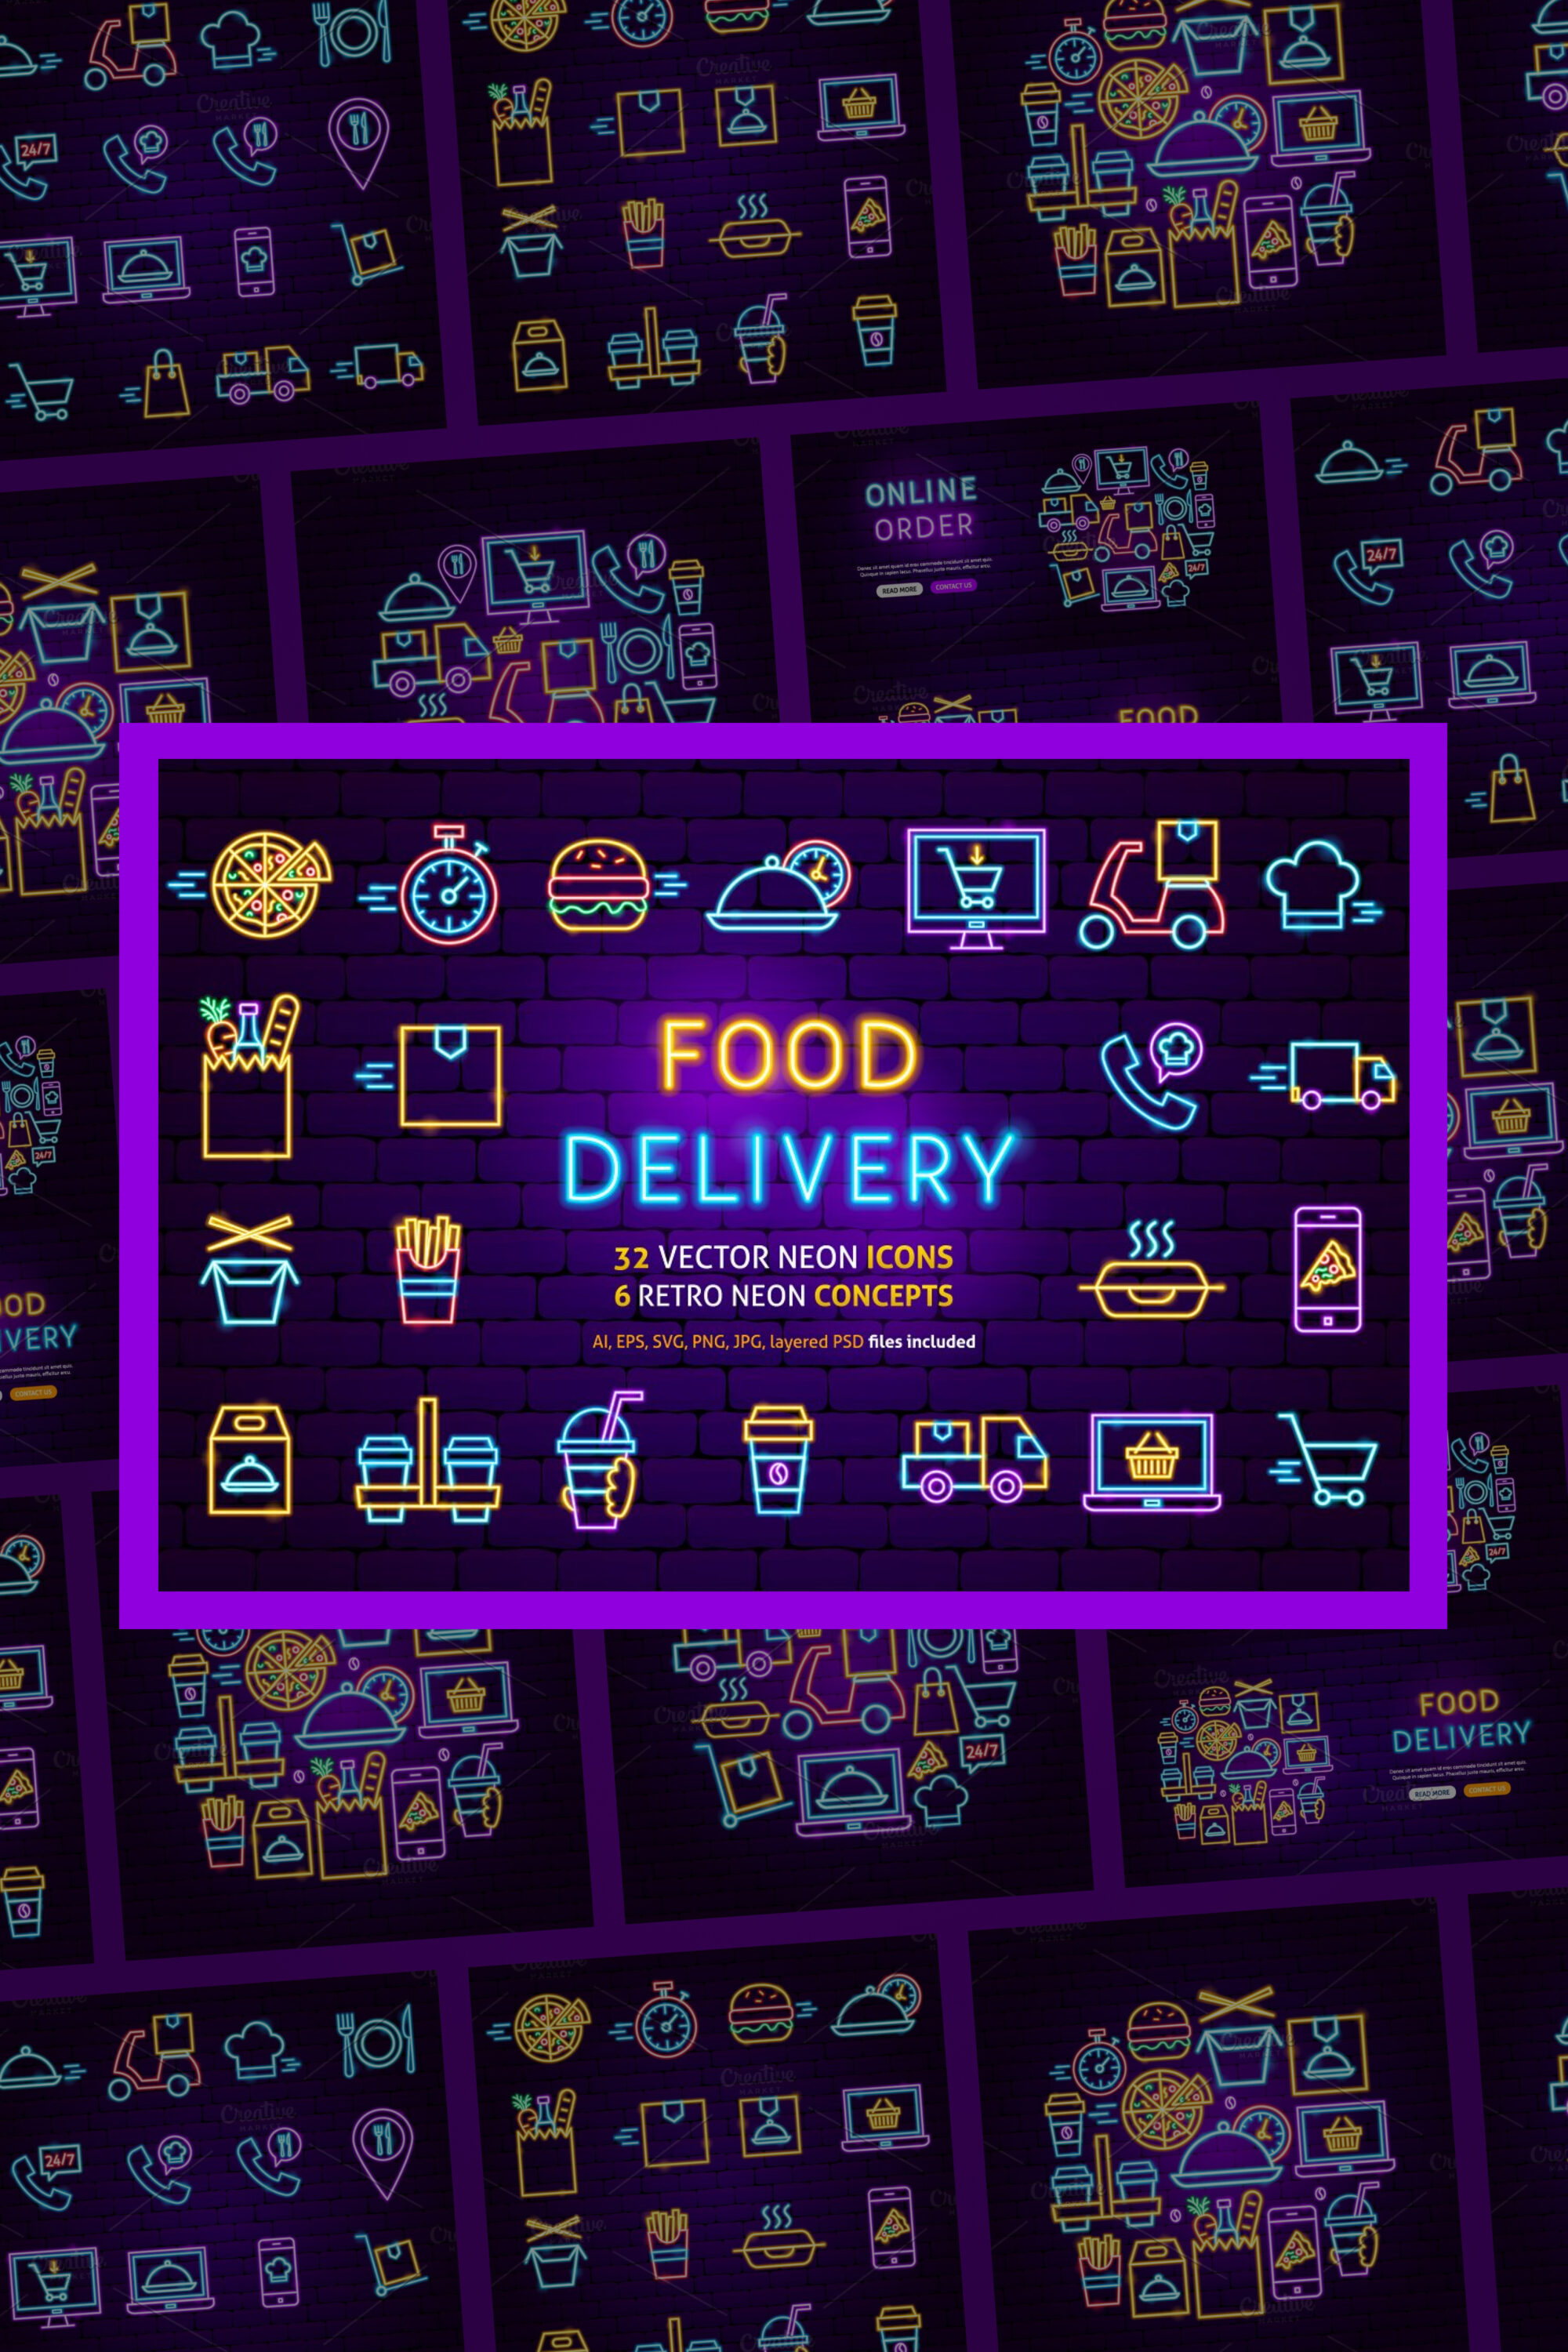 Food delivery neon of pinterest.